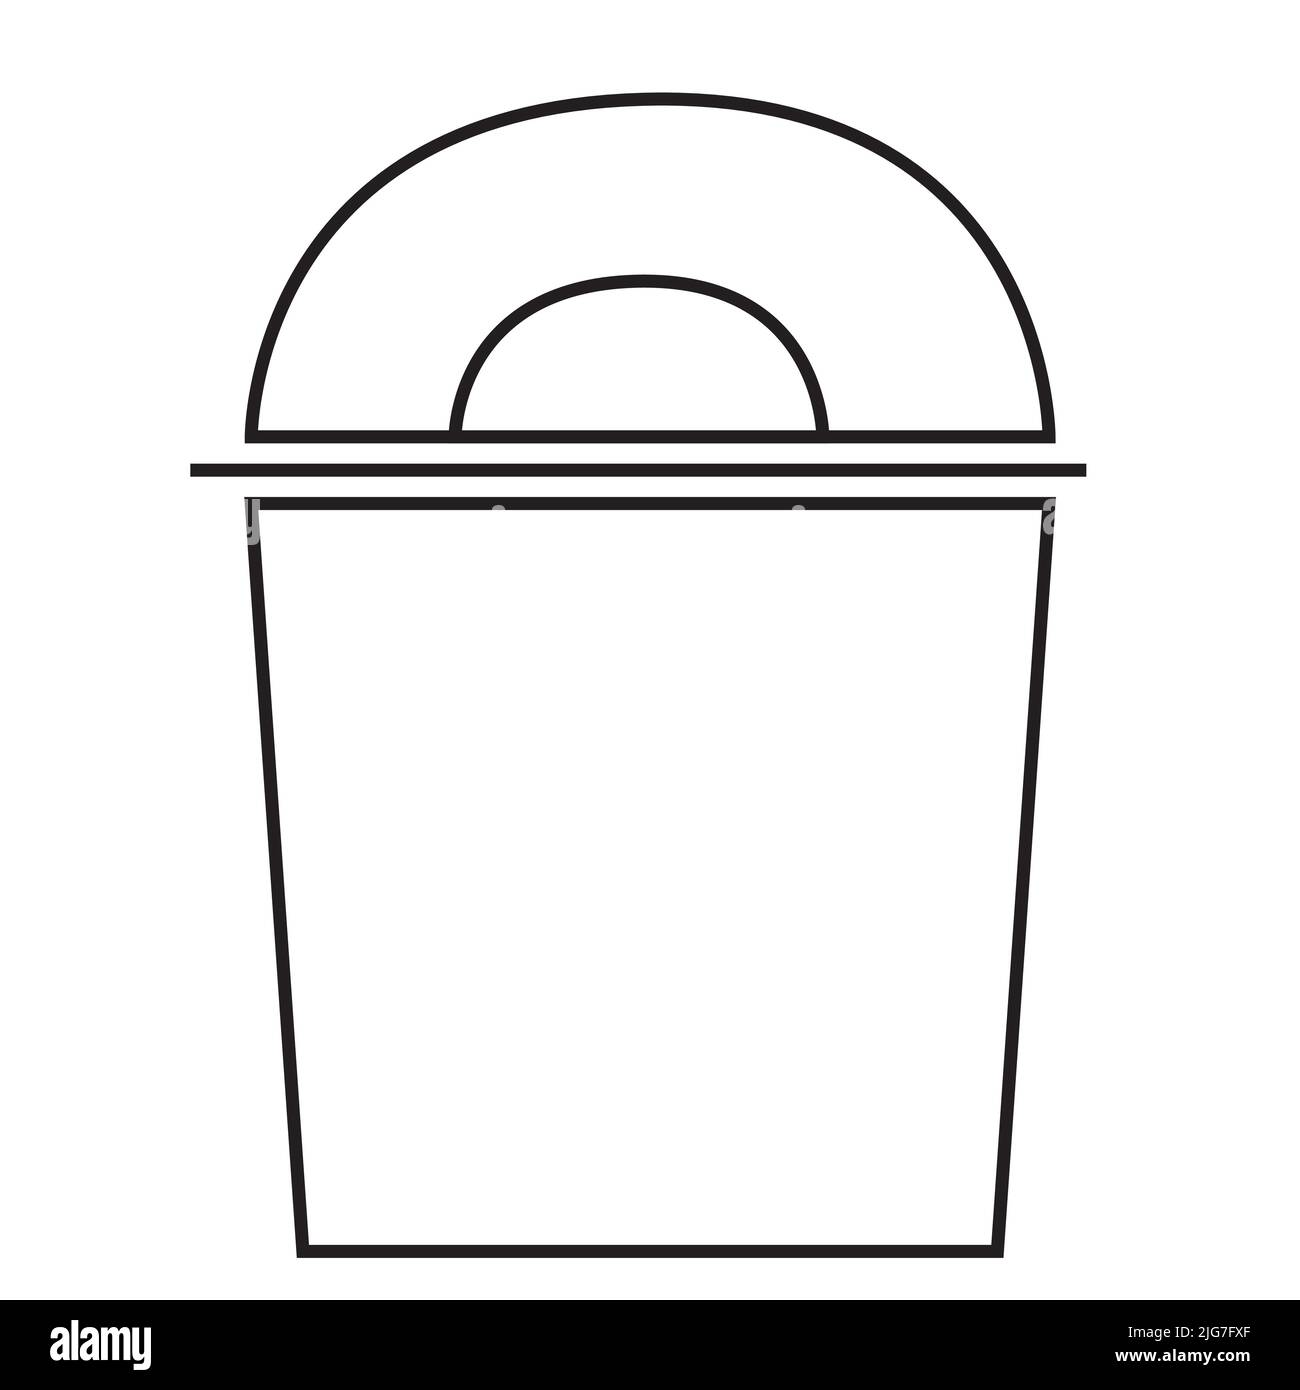 Trash bin icon without recycle symbol isolated on white background vector illustration Stock Vector